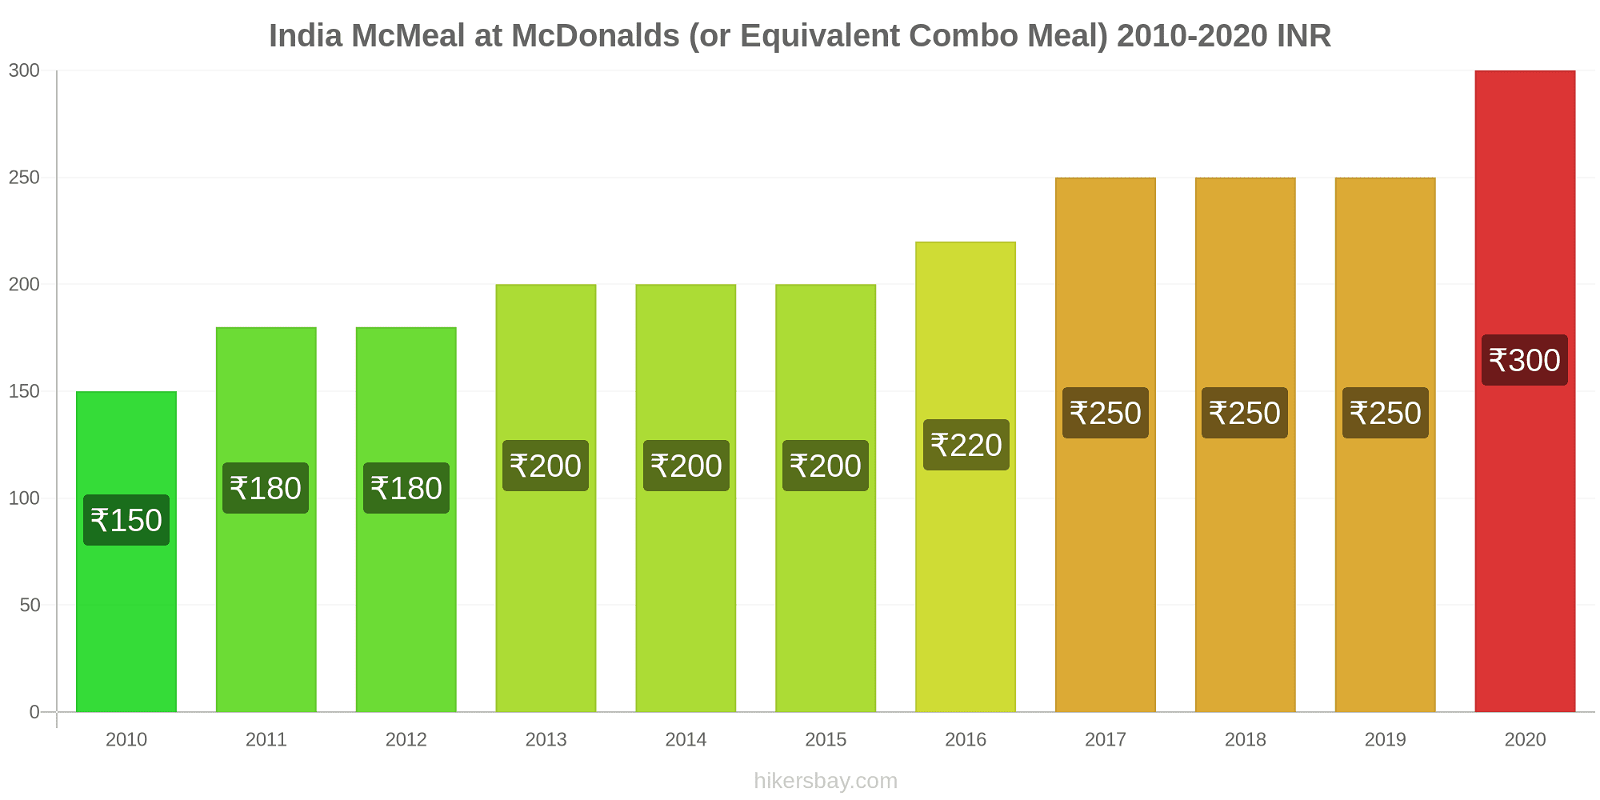 India price changes McMeal at McDonalds (or Equivalent Combo Meal) hikersbay.com